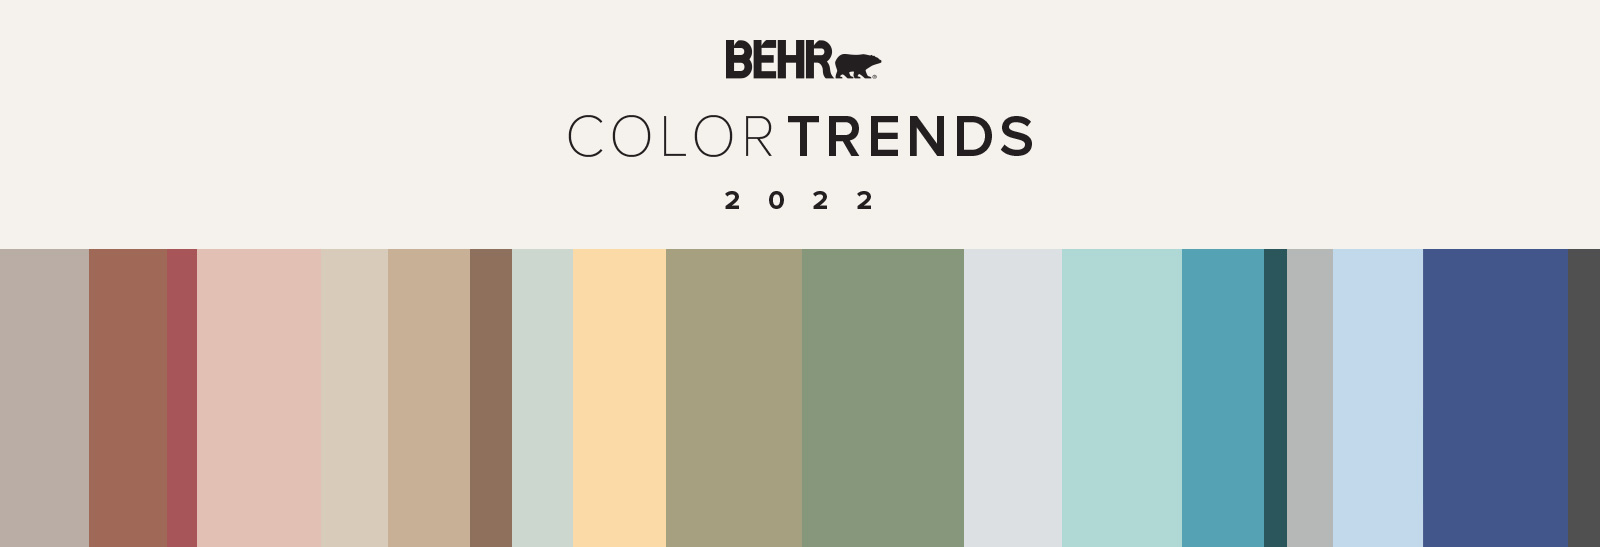 Get inspired with BEHR Color Trends 2022